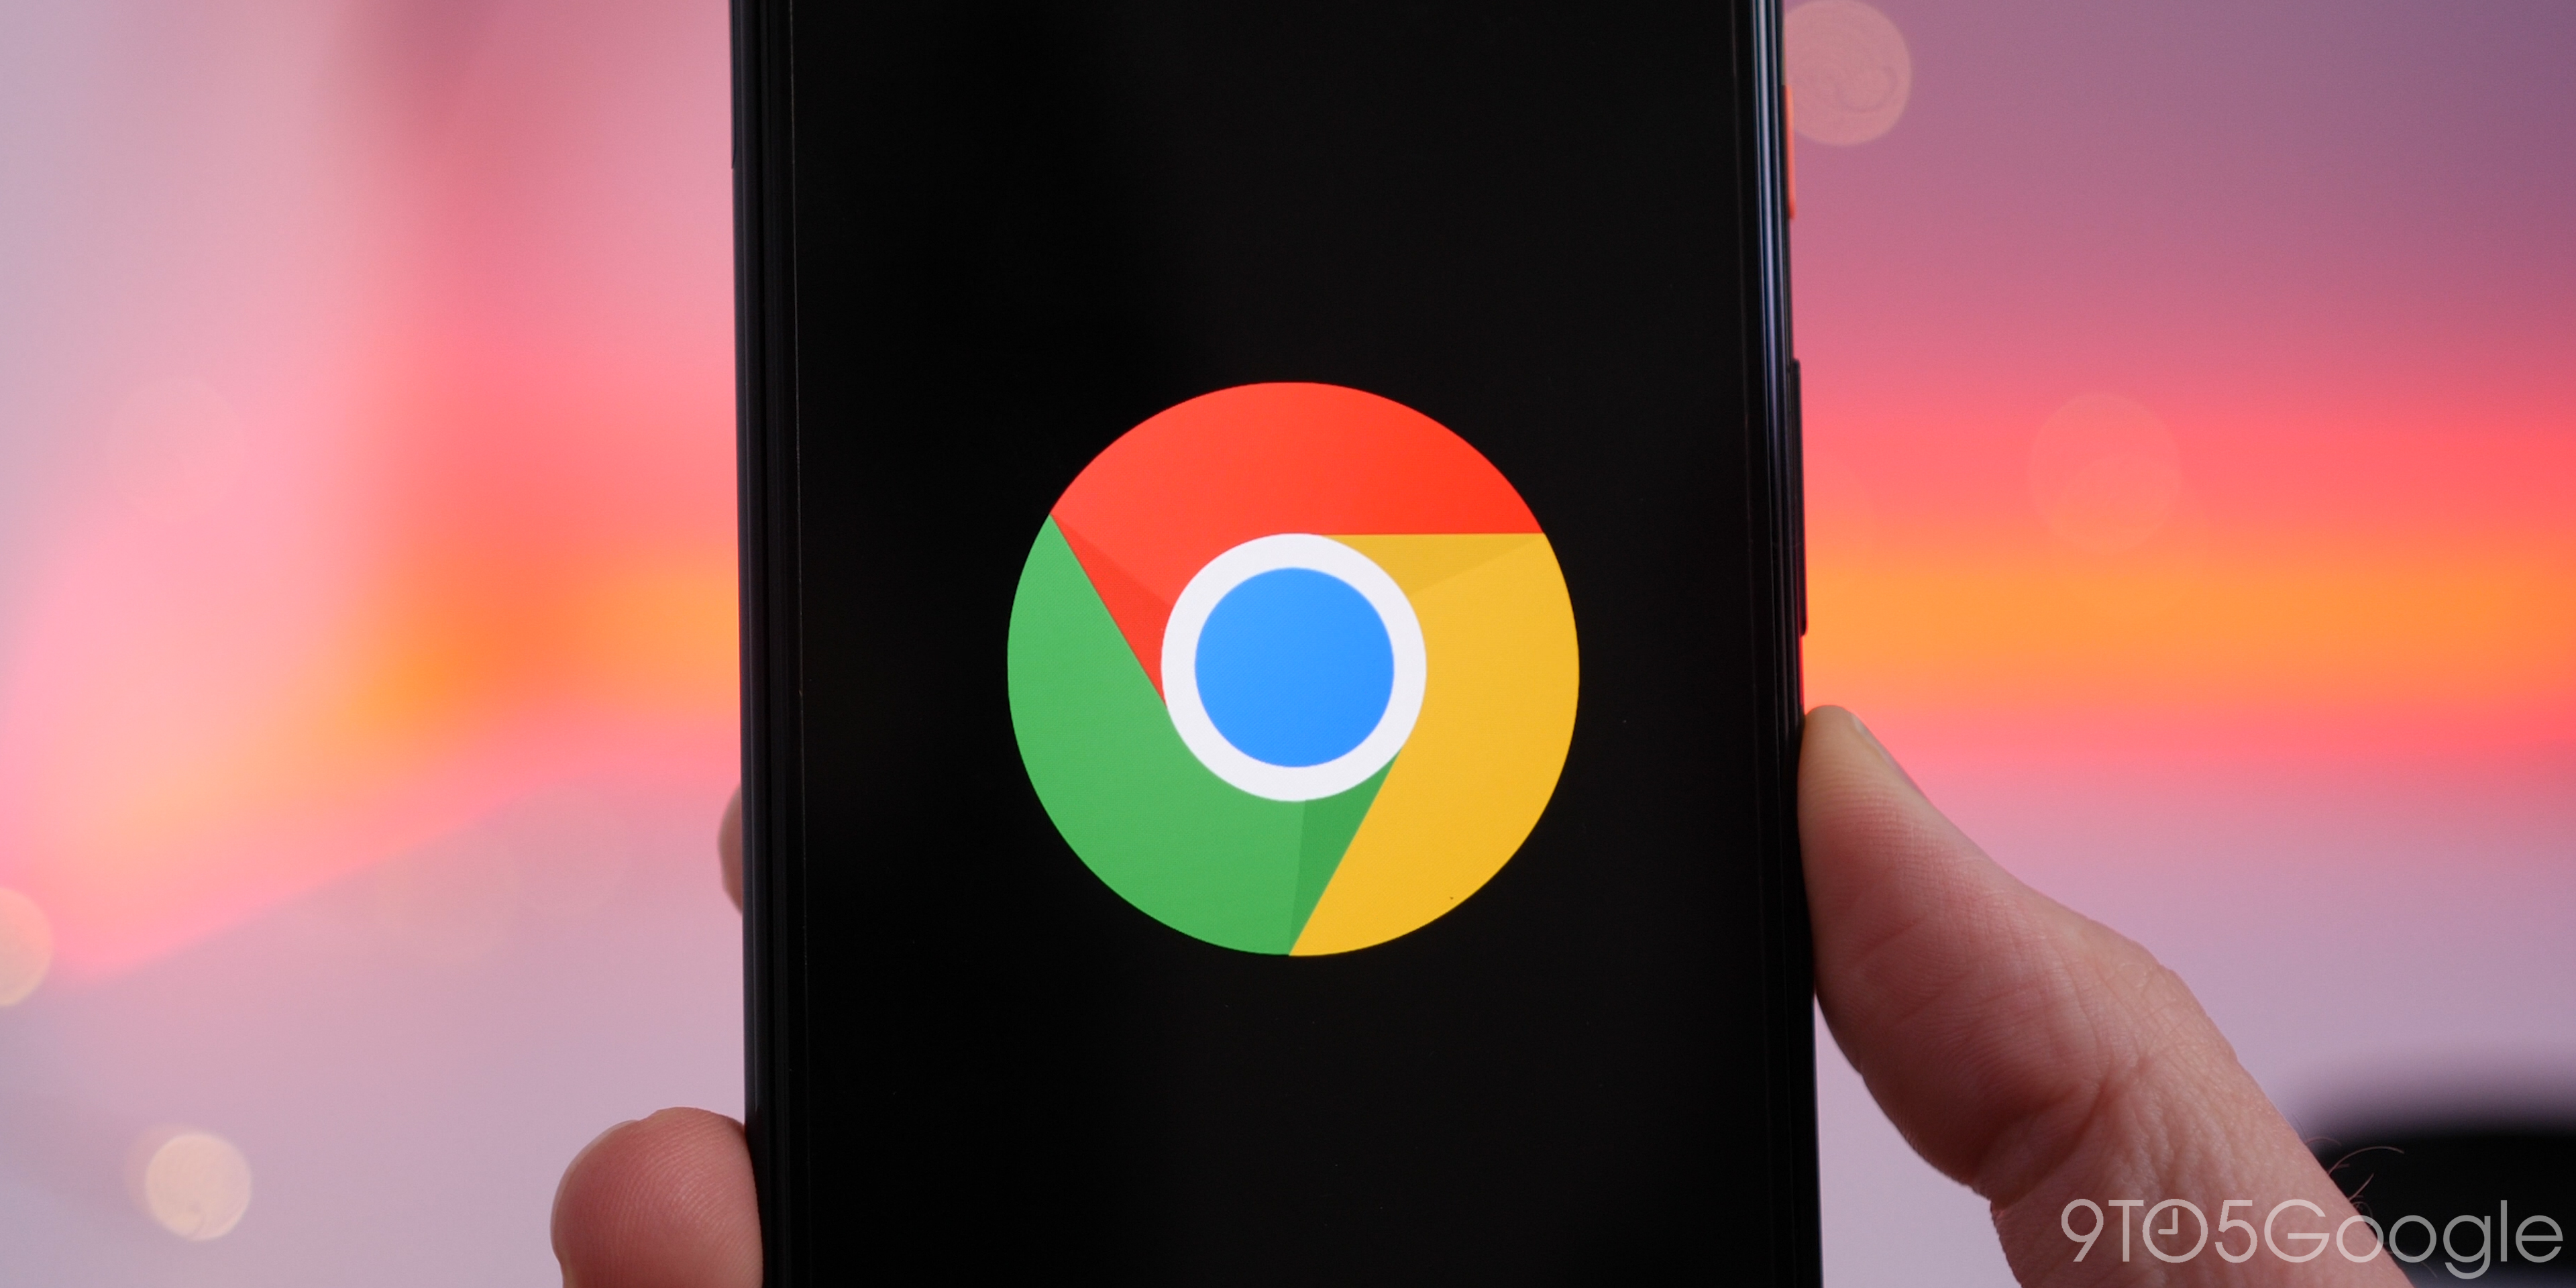 Chrome Tests Download Later For Scheduled Downloads 9to5google